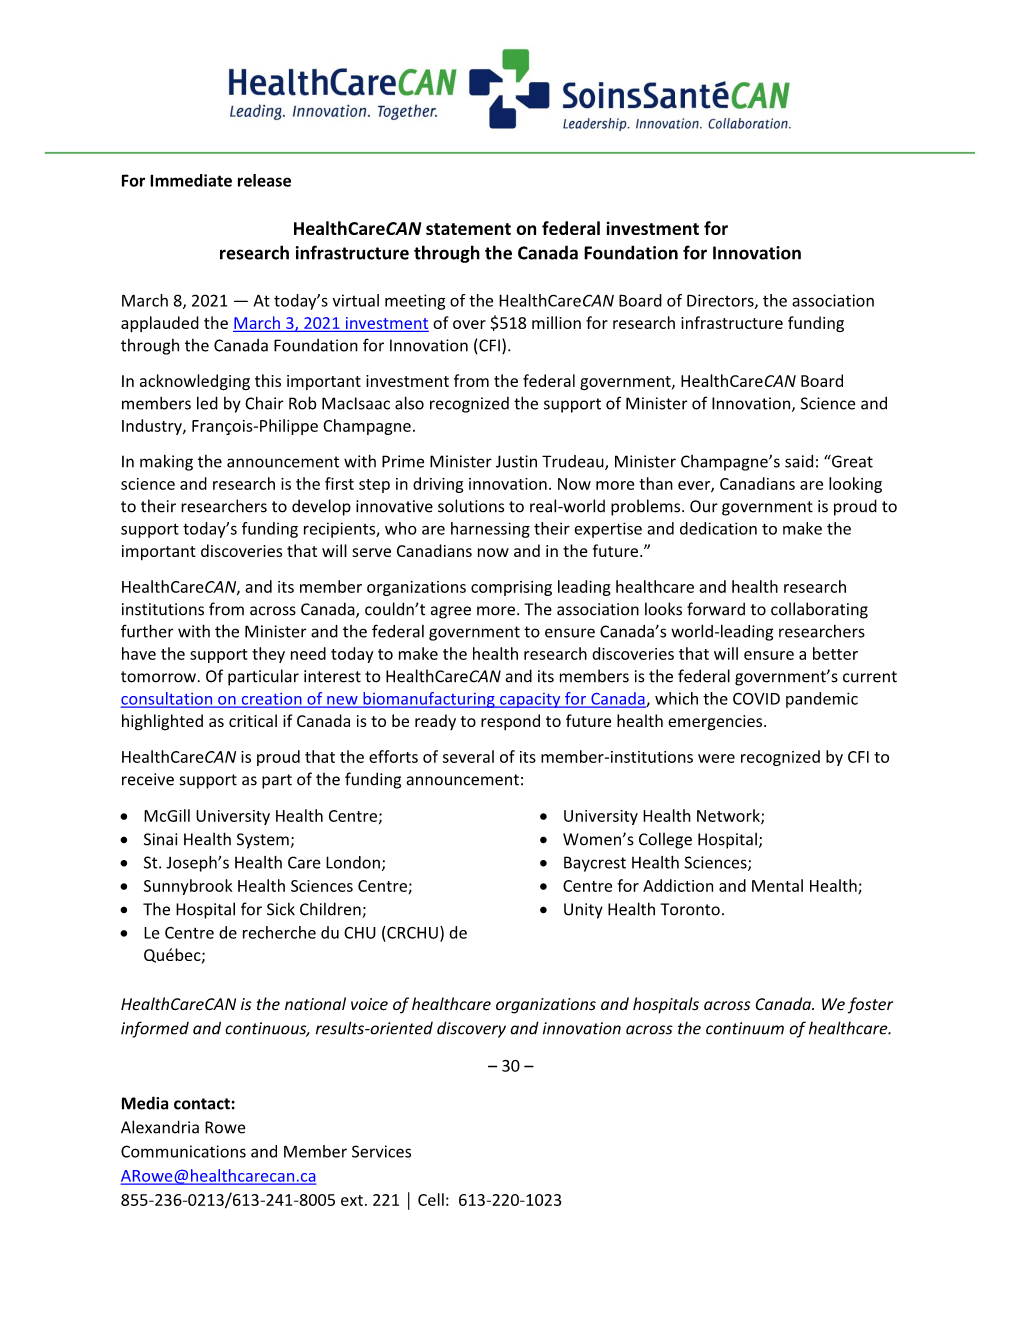 Healthcarecan Statement on Federal Investment for Research Infrastructure Through the Canada Foundation for Innovation